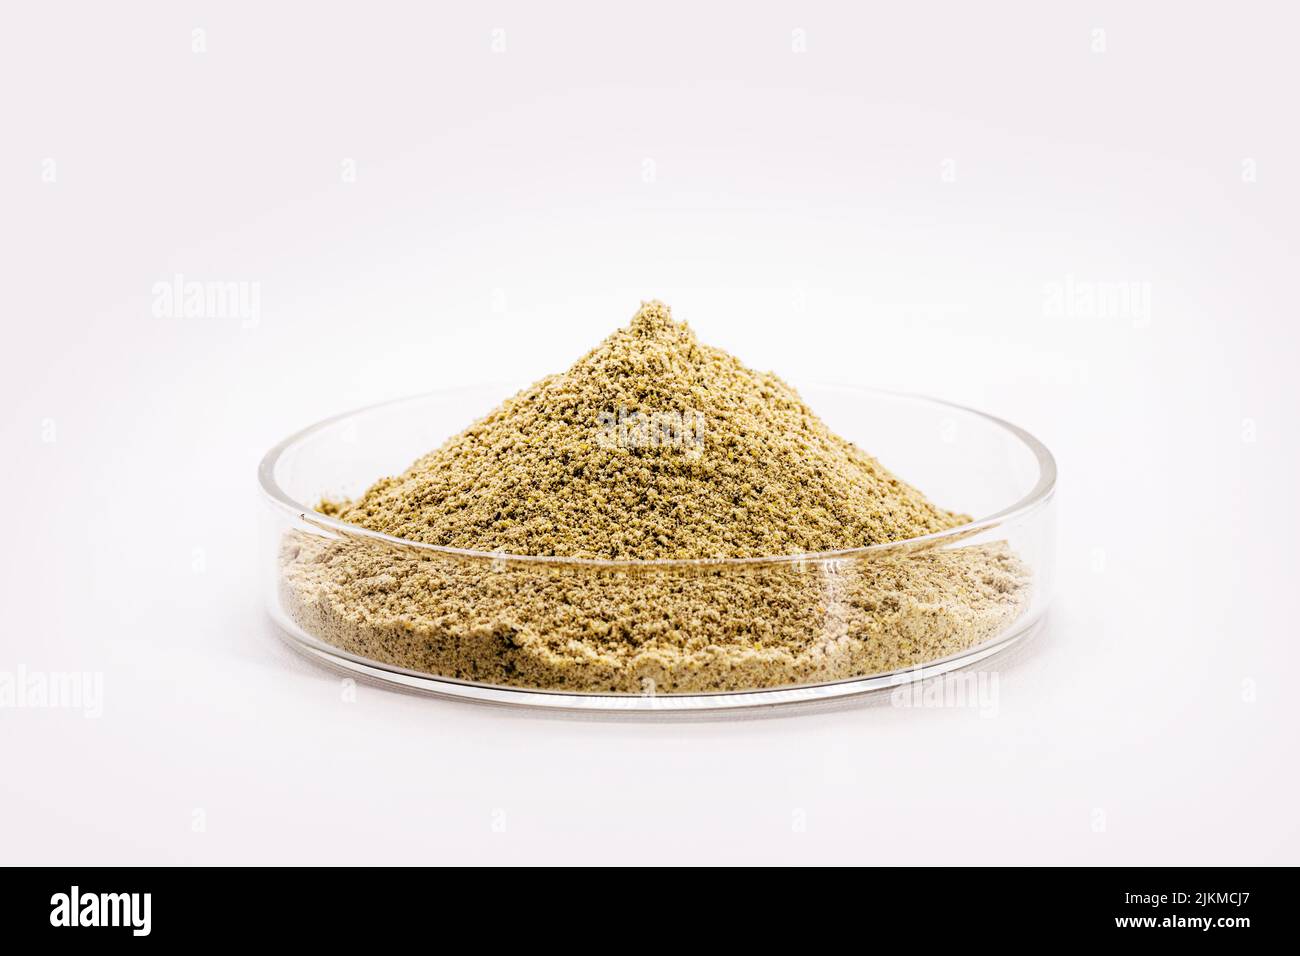 Yeast Extract Powder, a waste product from brewing that contains high concentrations of yeast and is often used in the food industry as an additive Stock Photo